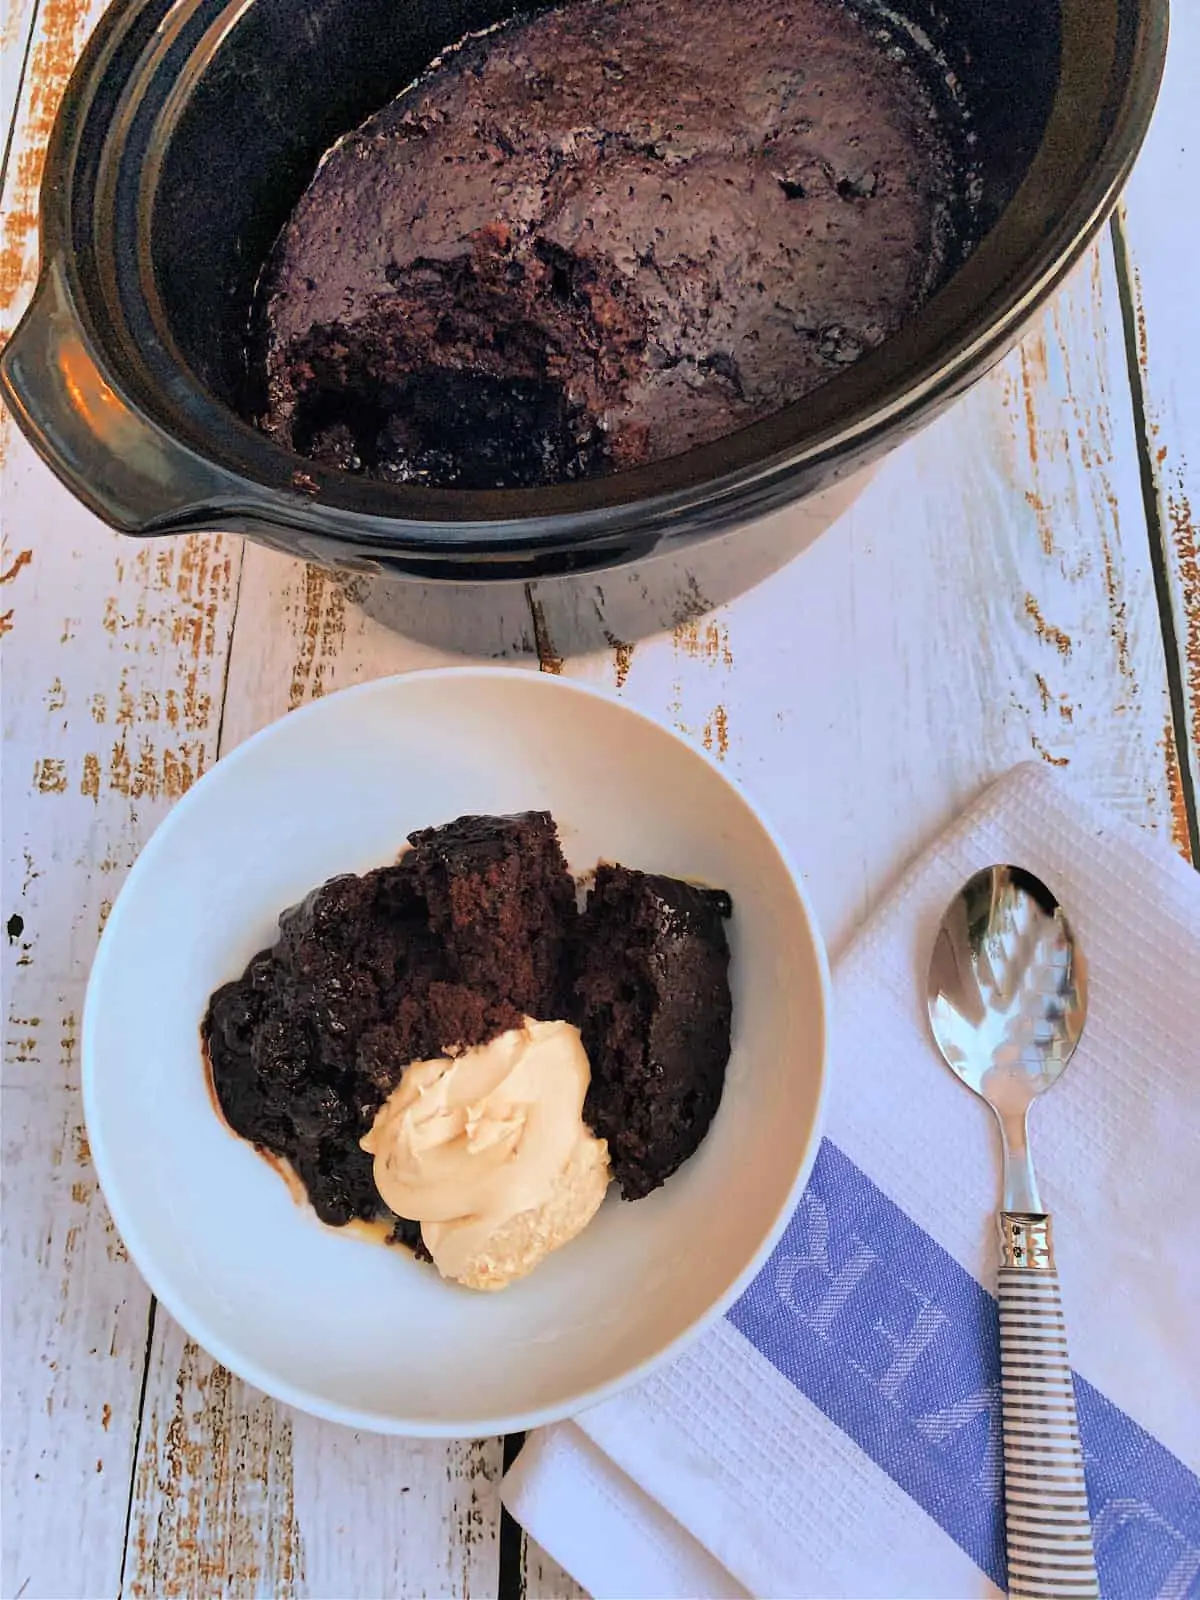 Slow cooker in background, bowl of chocolate lava cake with cream in front, with a spoon to the side.